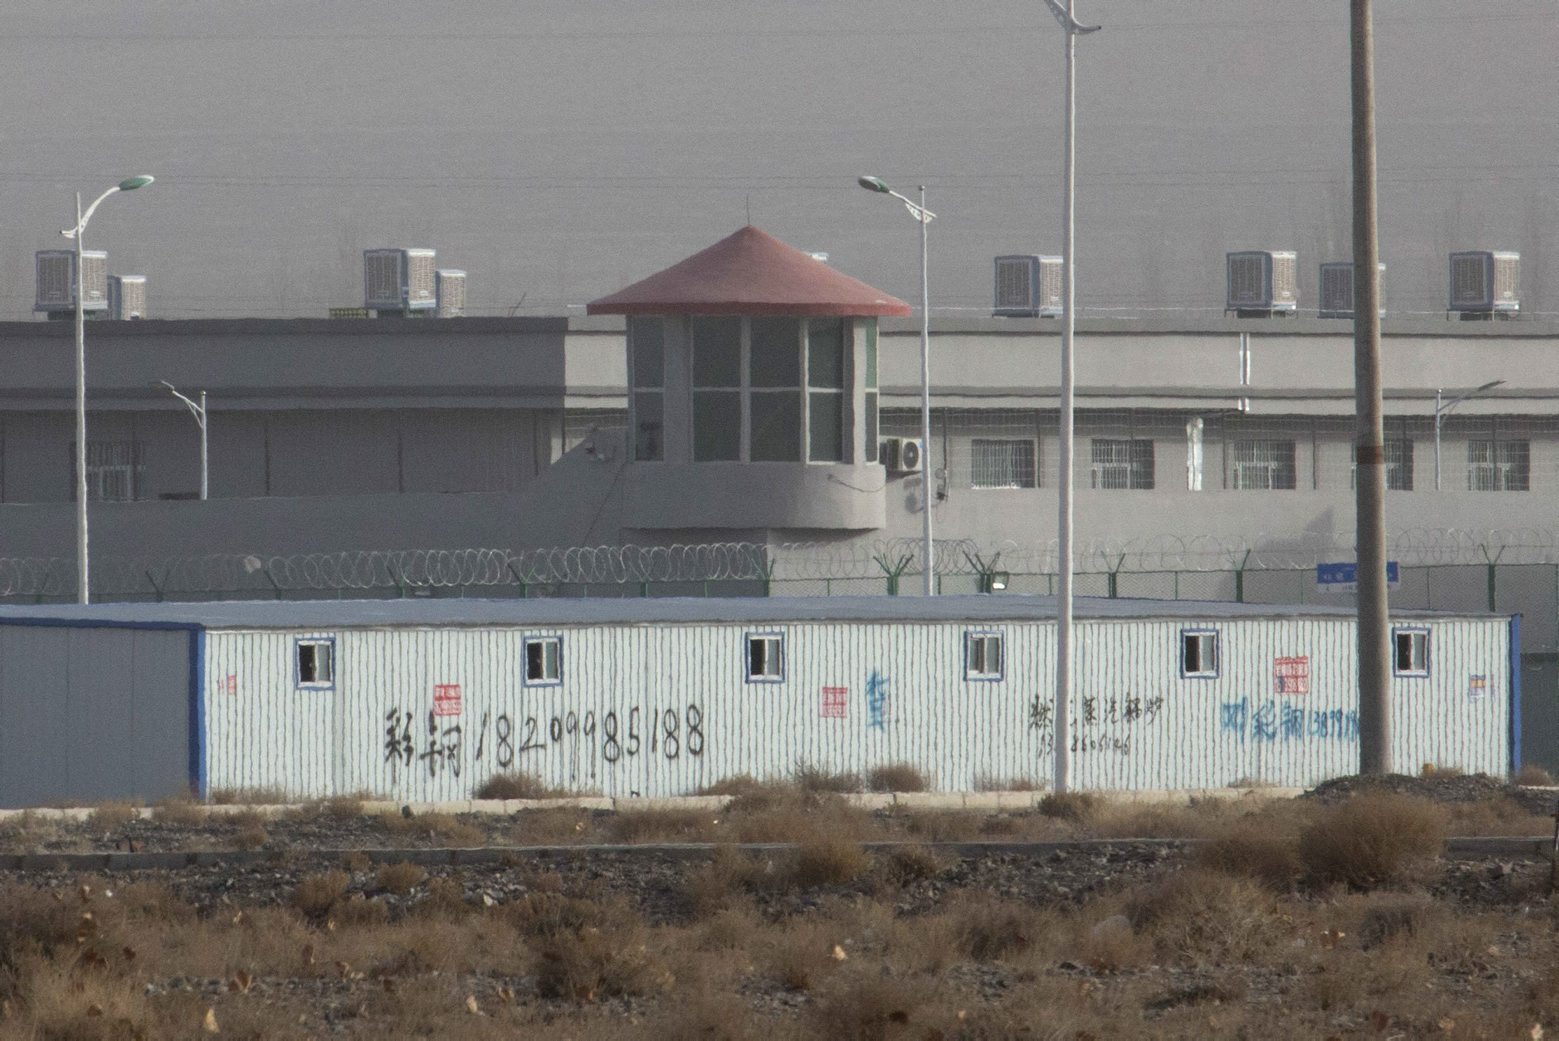 FILE.- In this Monday, Dec. 3, 2018, file photo, a guard tower and barbed wire fences are seen around a facility in the Kunshan Industrial Park in Artux in western China's Xinjiang region. This is one of a growing number of internment camps in the Xinjiang region, where by some estimates 1 million Muslims are detained, forced to give up their language and their religion and subject to political indoctrination. Highly confidential blueprint documents leaked to a consortium of news organizations lay out the Chinese government's deliberate strategy to lock up ethnic minorities to rewire their thoughts and even the language they speak.(AP Photo/File) The China Cables